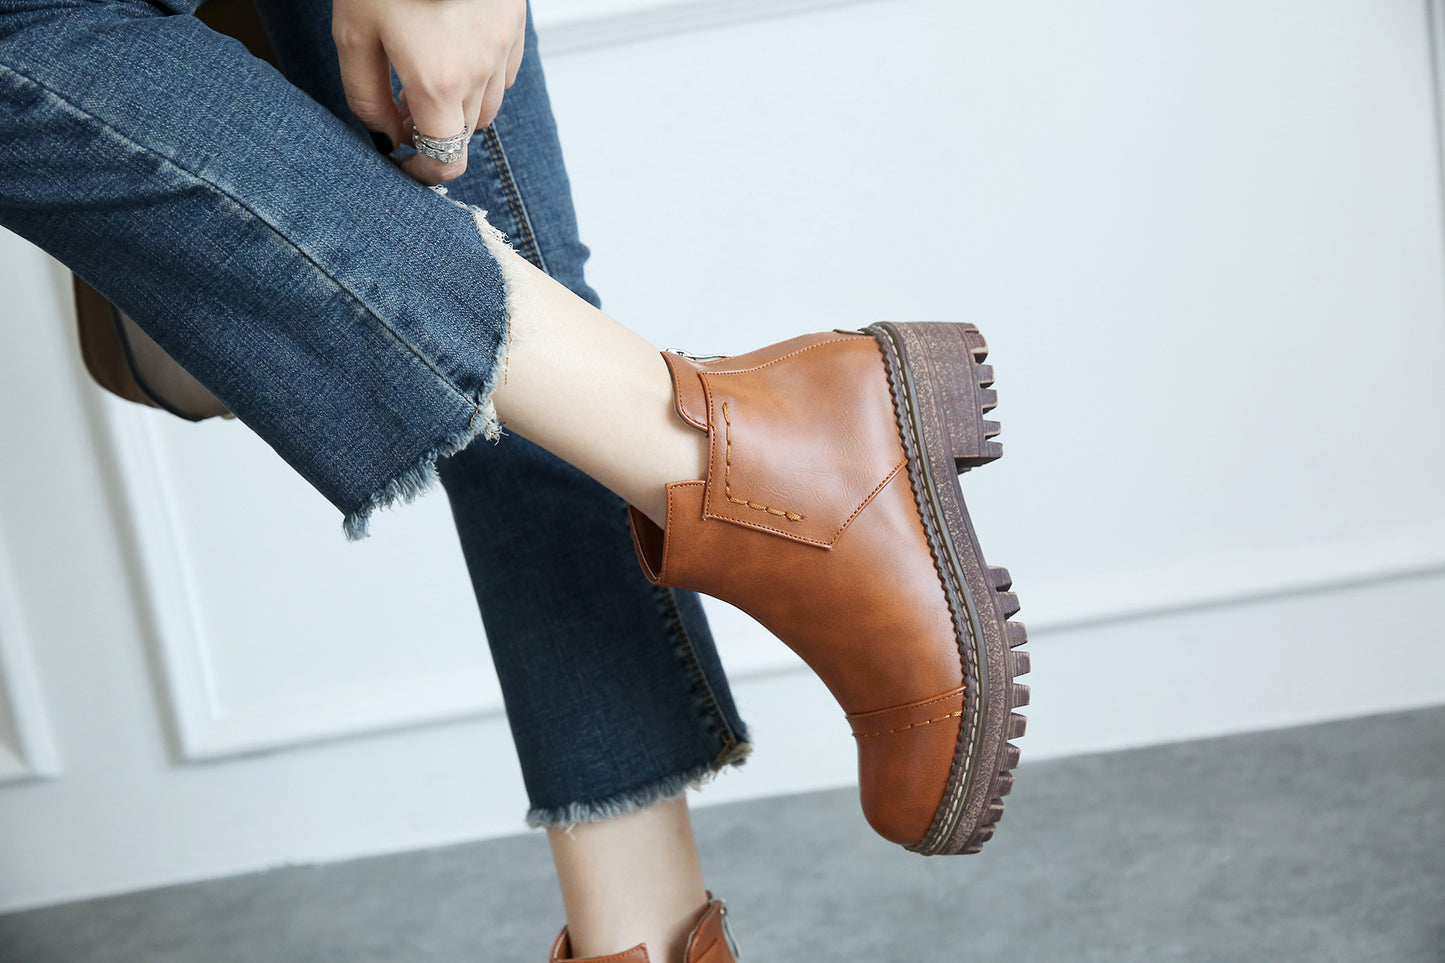 Leisure College Wind Motorcycle Boots Autumn Winter Low Heels Chelsea Boots